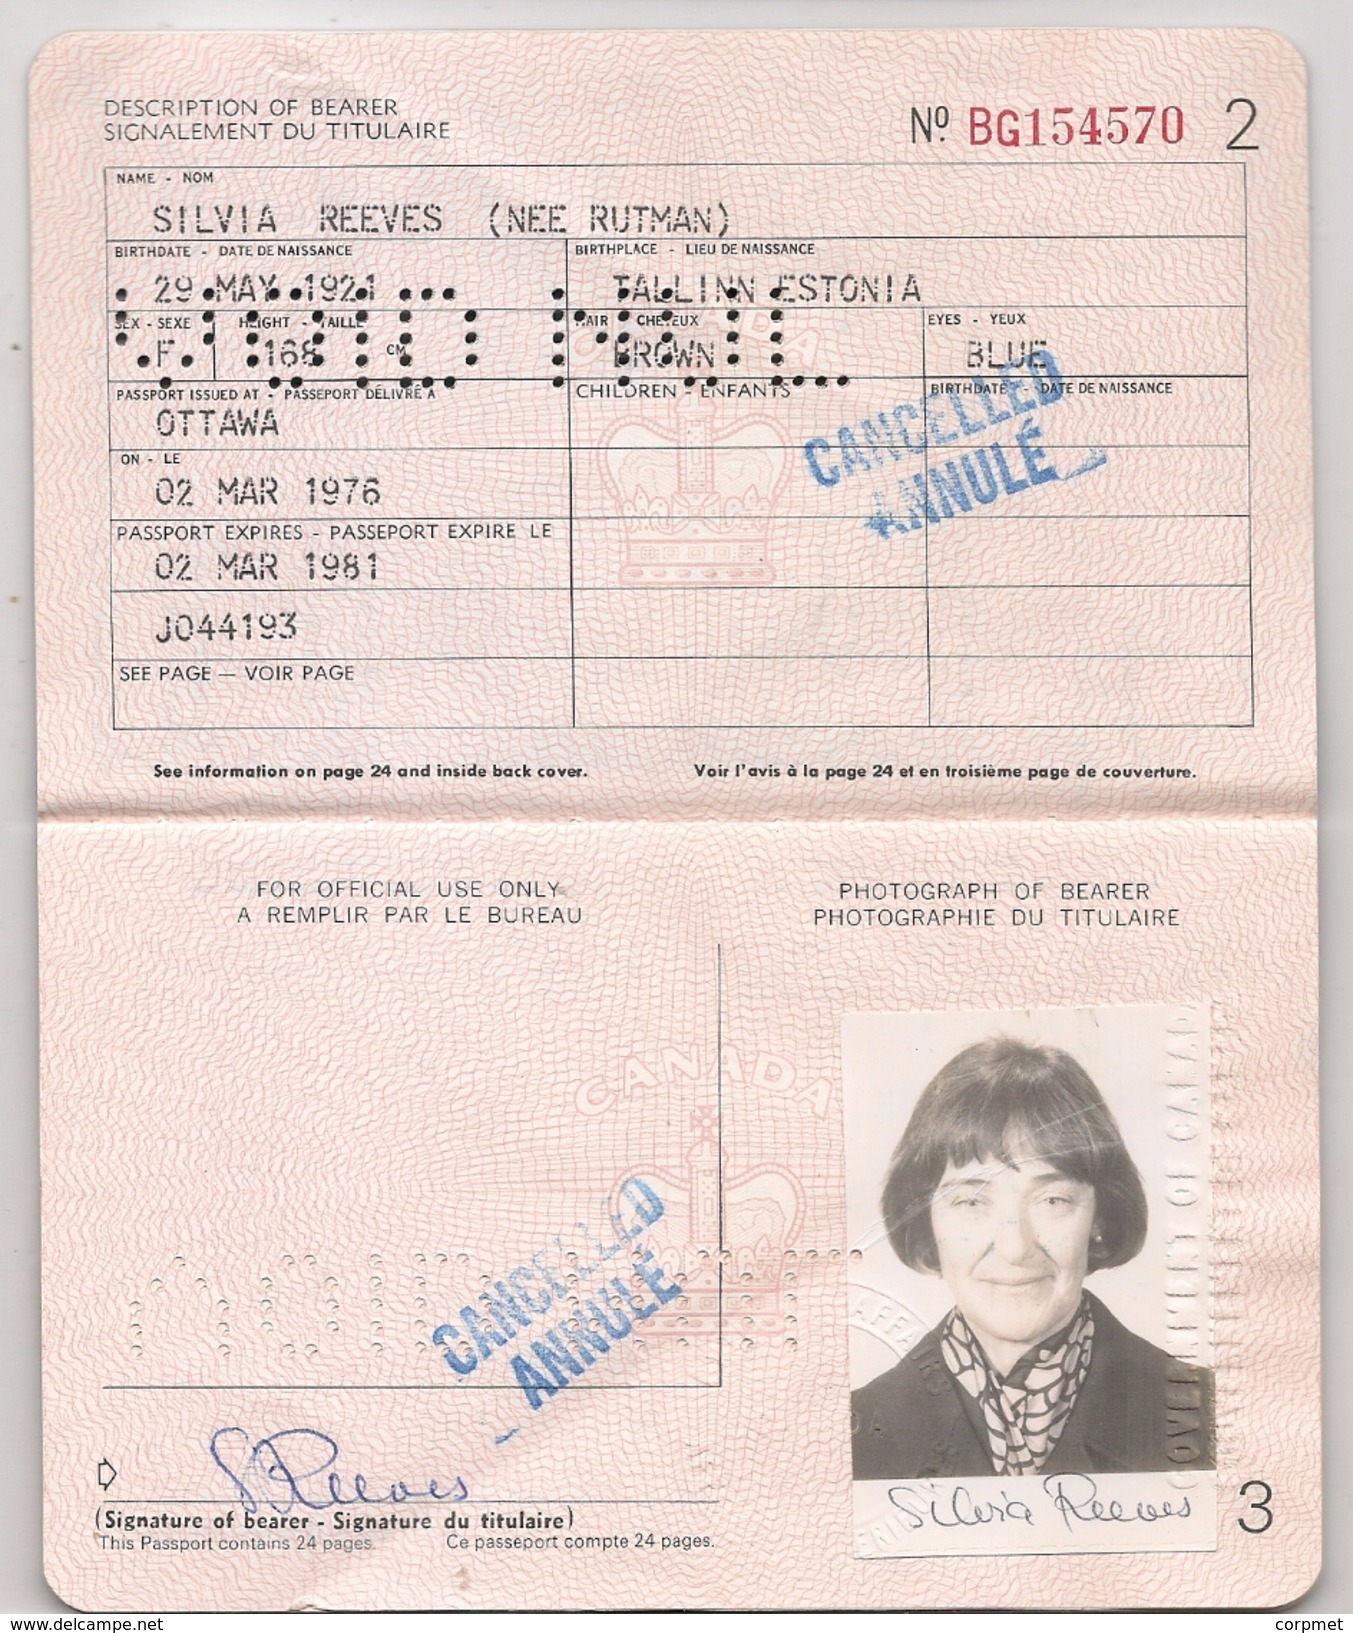 CANADA -1976 PASSPORT - PASSEPORT - ESTONIA Born Lady - PASSPORT With The 2 Names The Old ESTONIAN And The New CANADIAN - Documentos Históricos